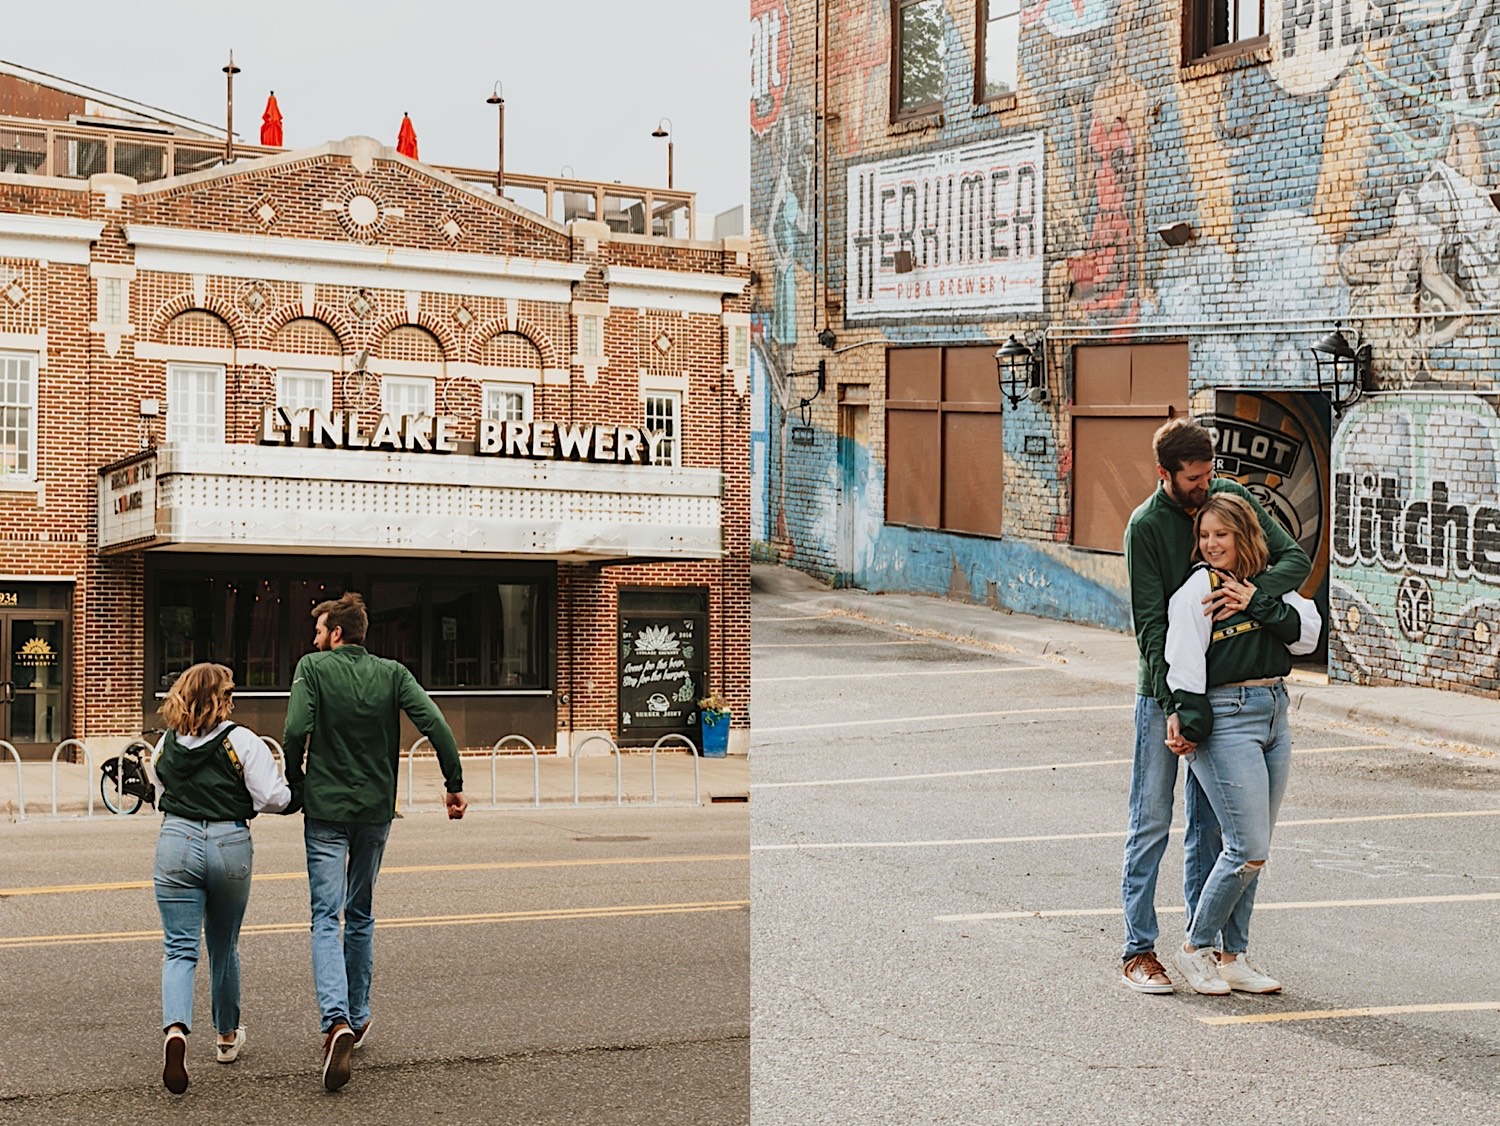 2 photos side by side of a couple, in the left they walk hand in hand across a street to the Lynlake Brewery, in the right the man is hugging the woman from behind